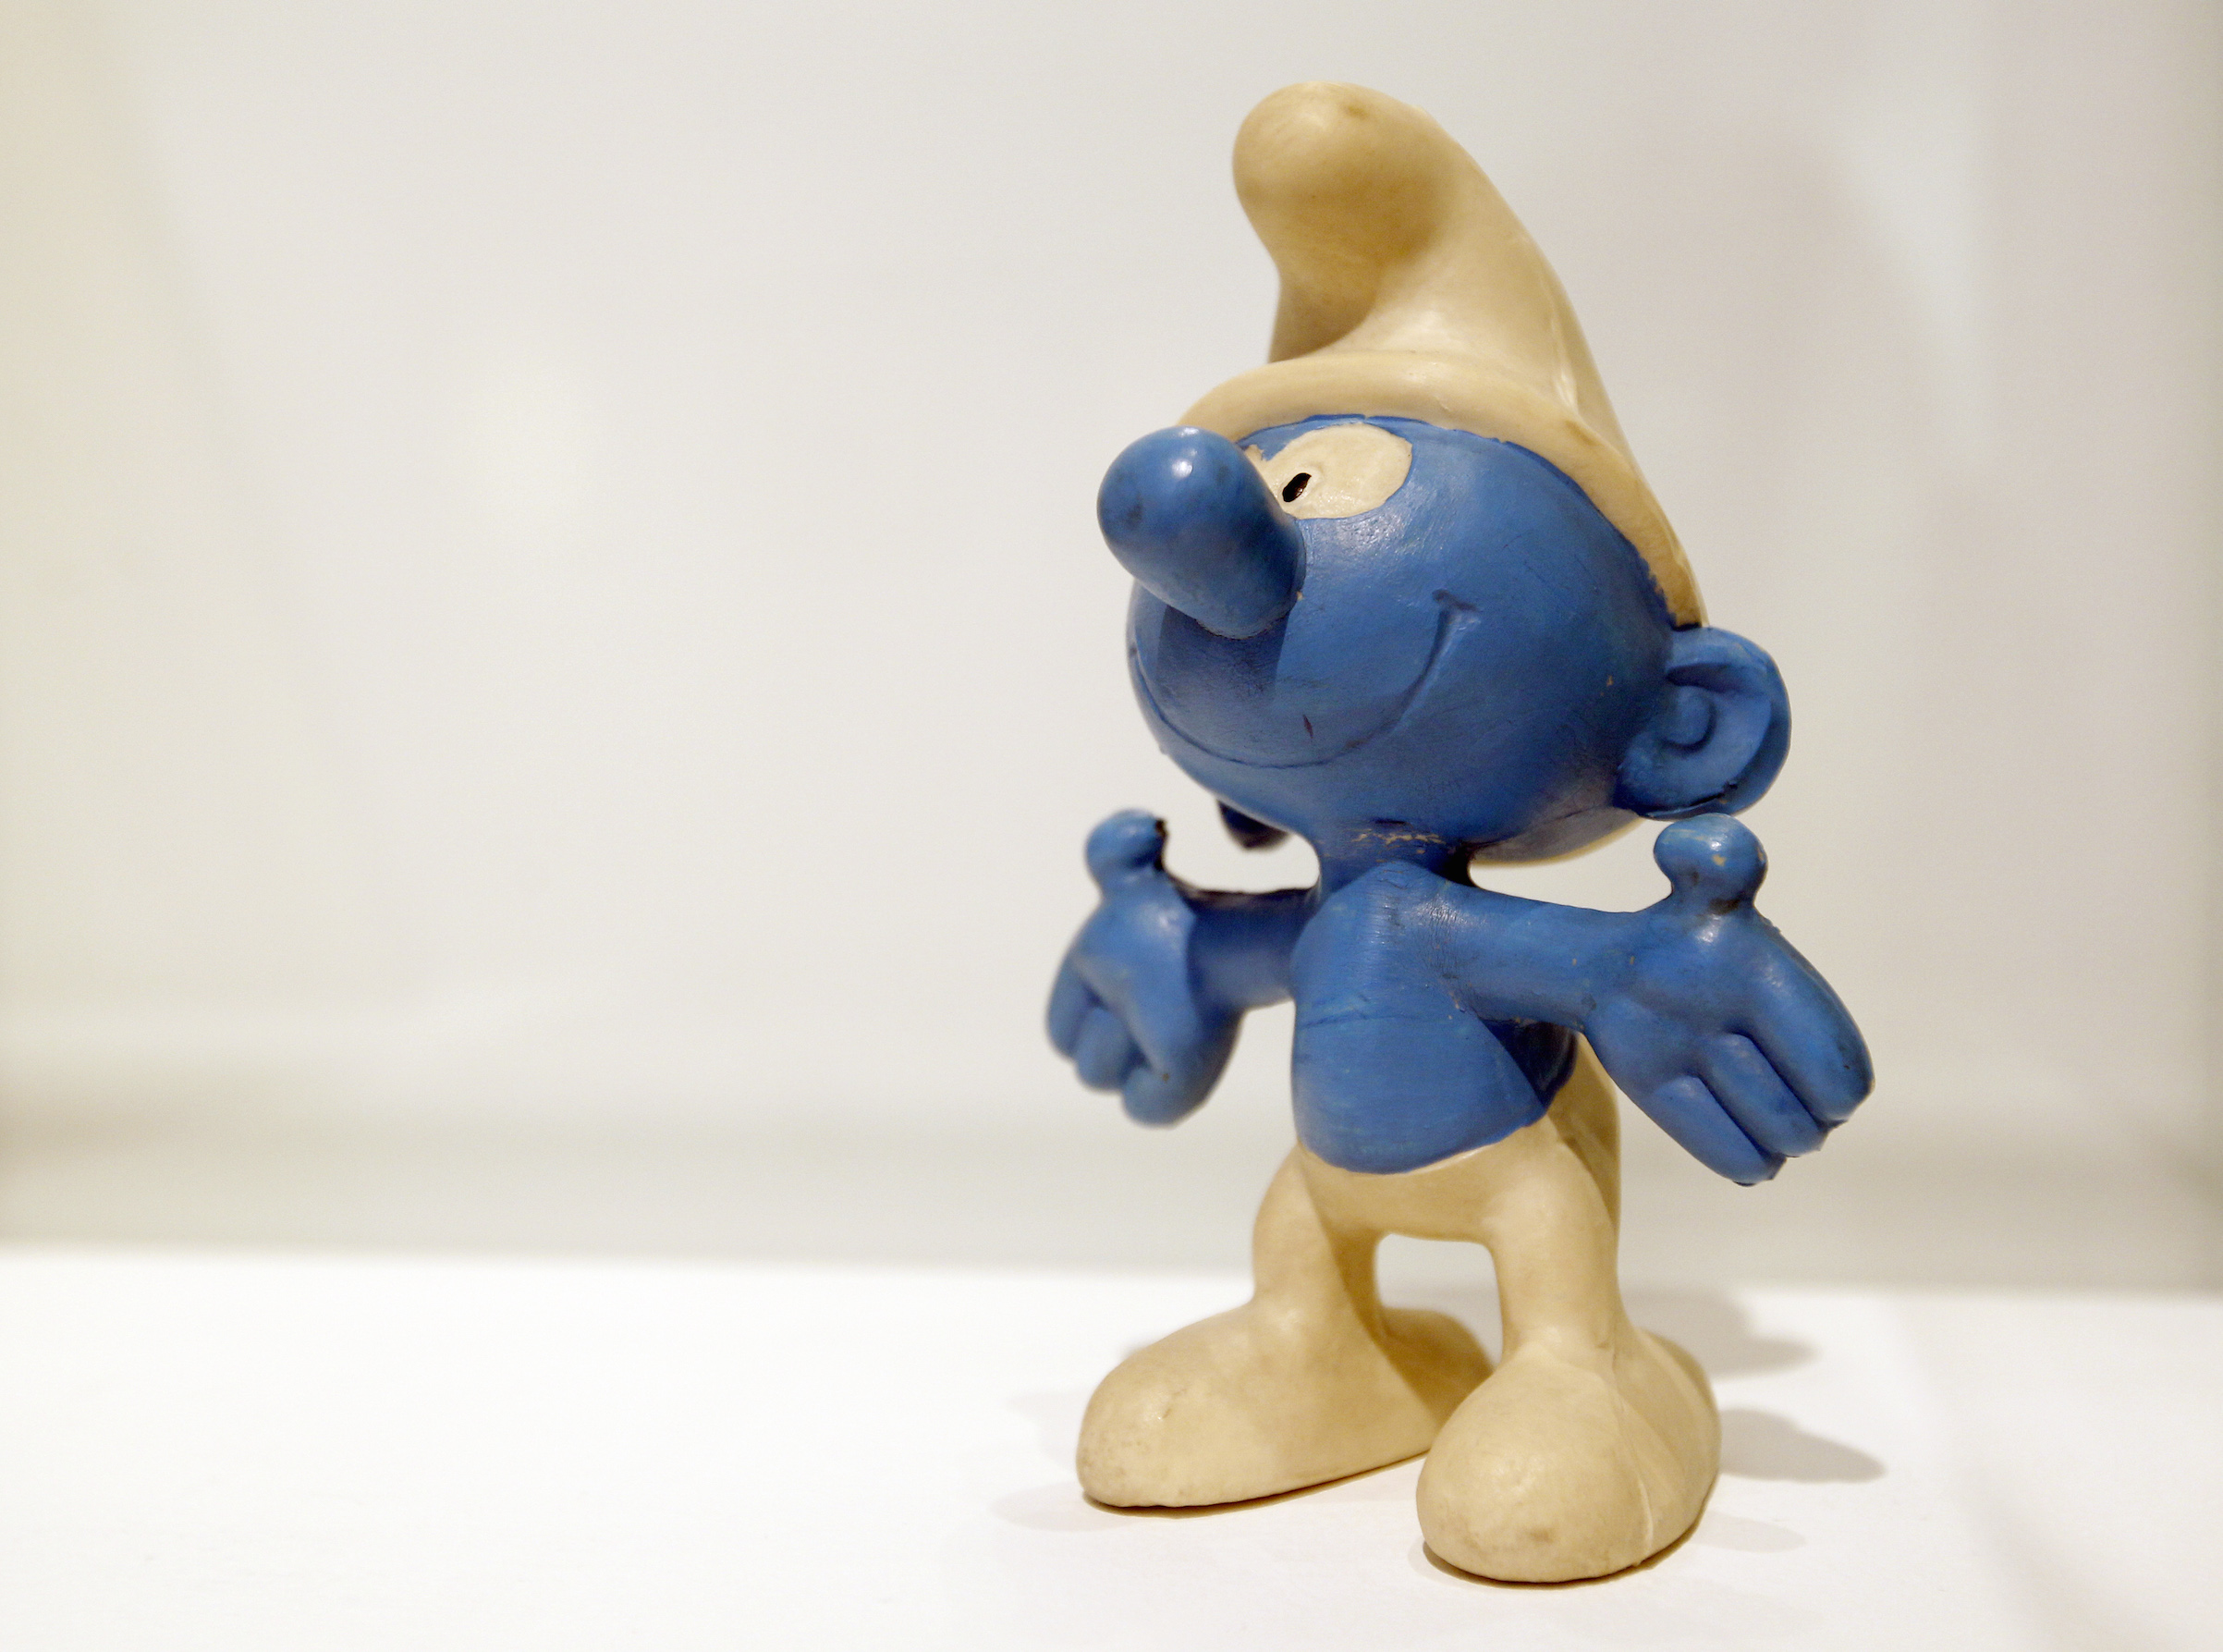 A Smurf (Schtroumpf in French) is displayed during an exhibition entitled 